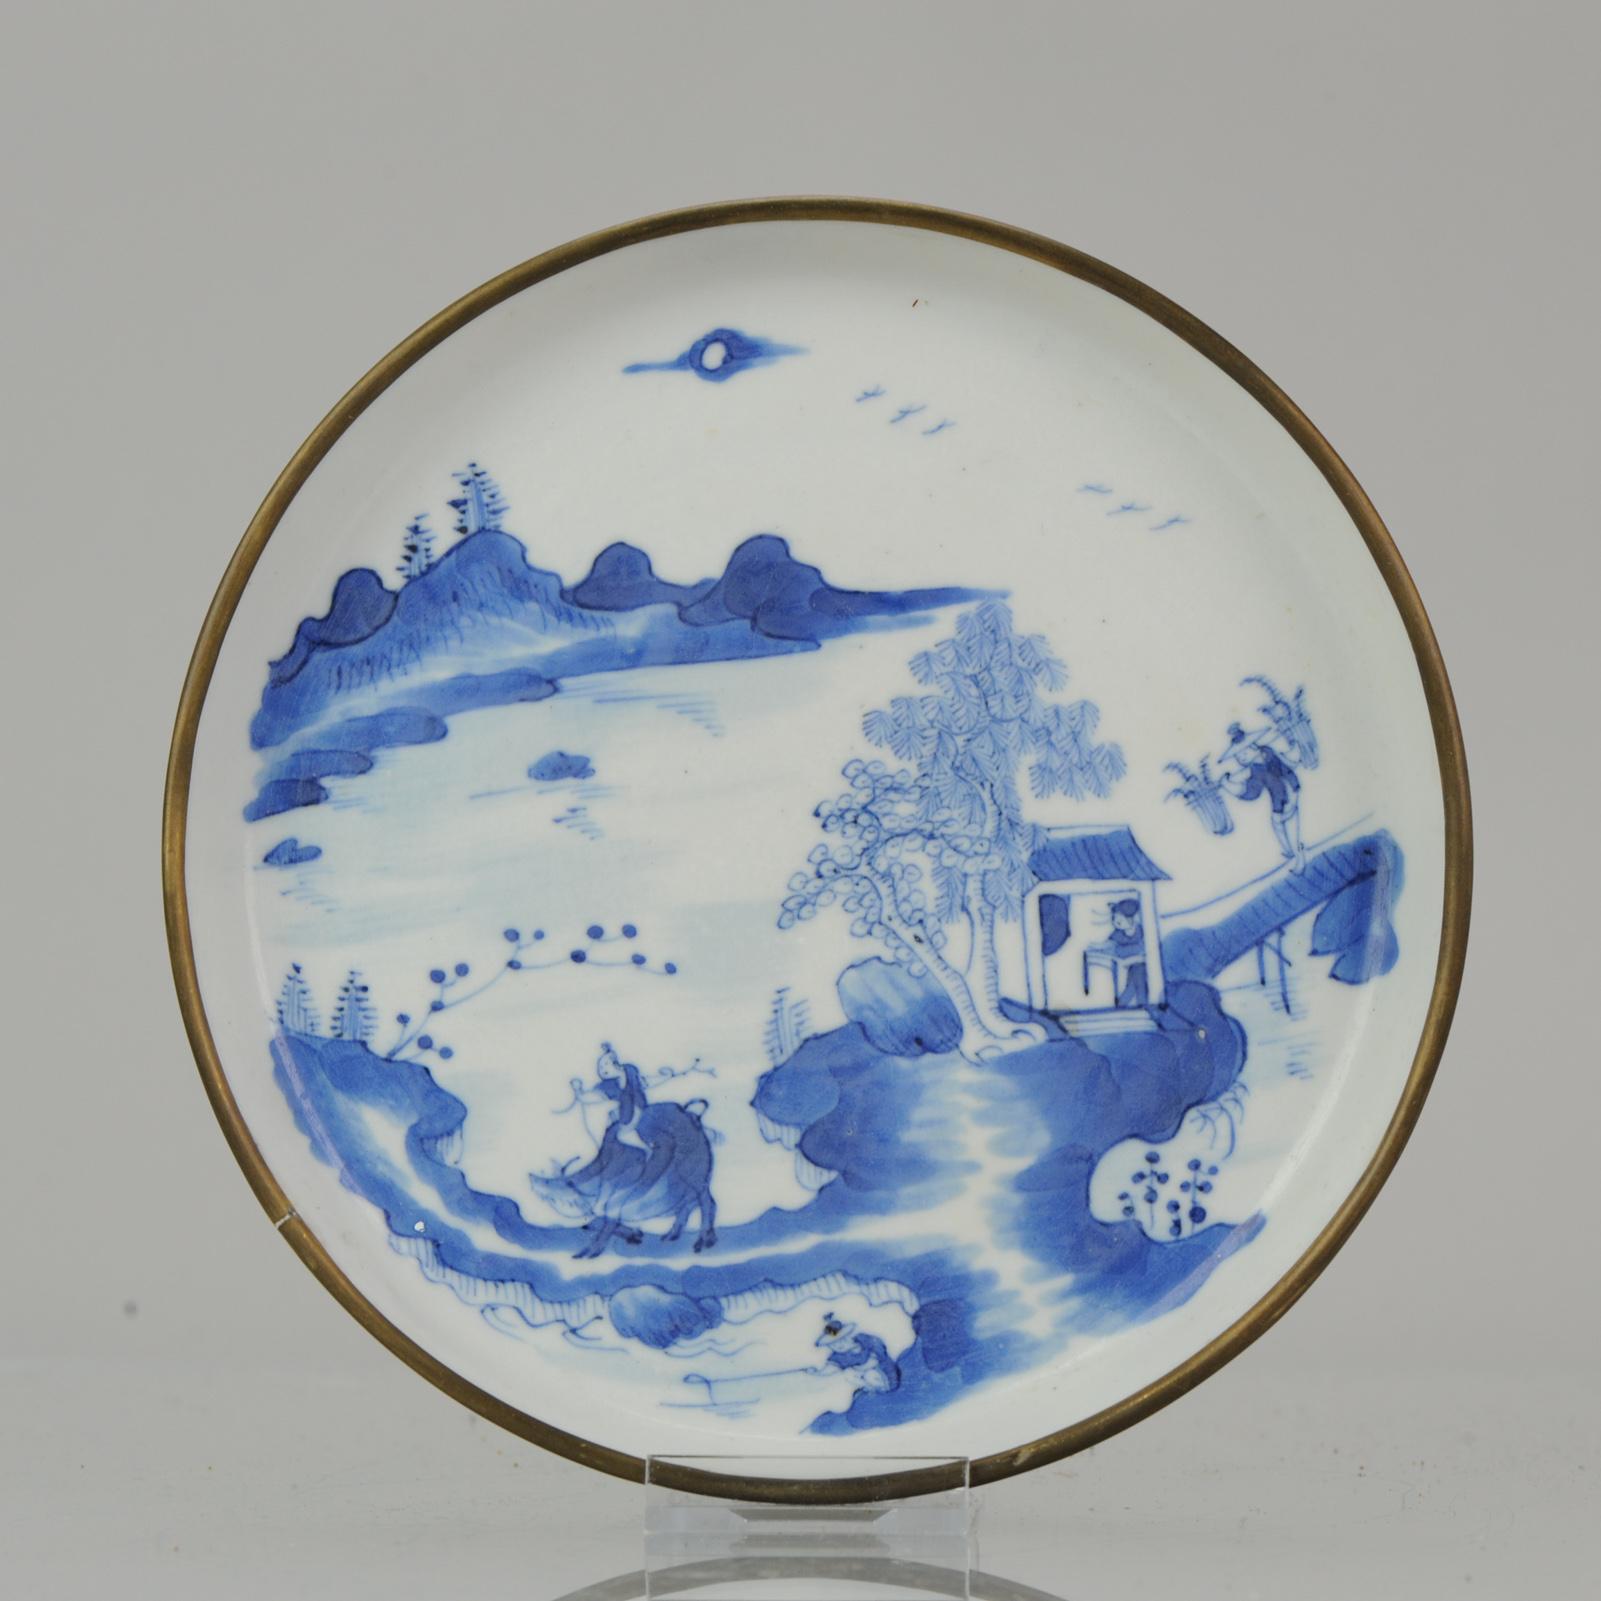 Description

A top quality dish of Bleu de Hue porcelain. The interior painted with a scene from with a boy and ox in landscape. Two other figures are also painted, 1 crossing a bridge and 1 in a small house. China, 19th century. For the